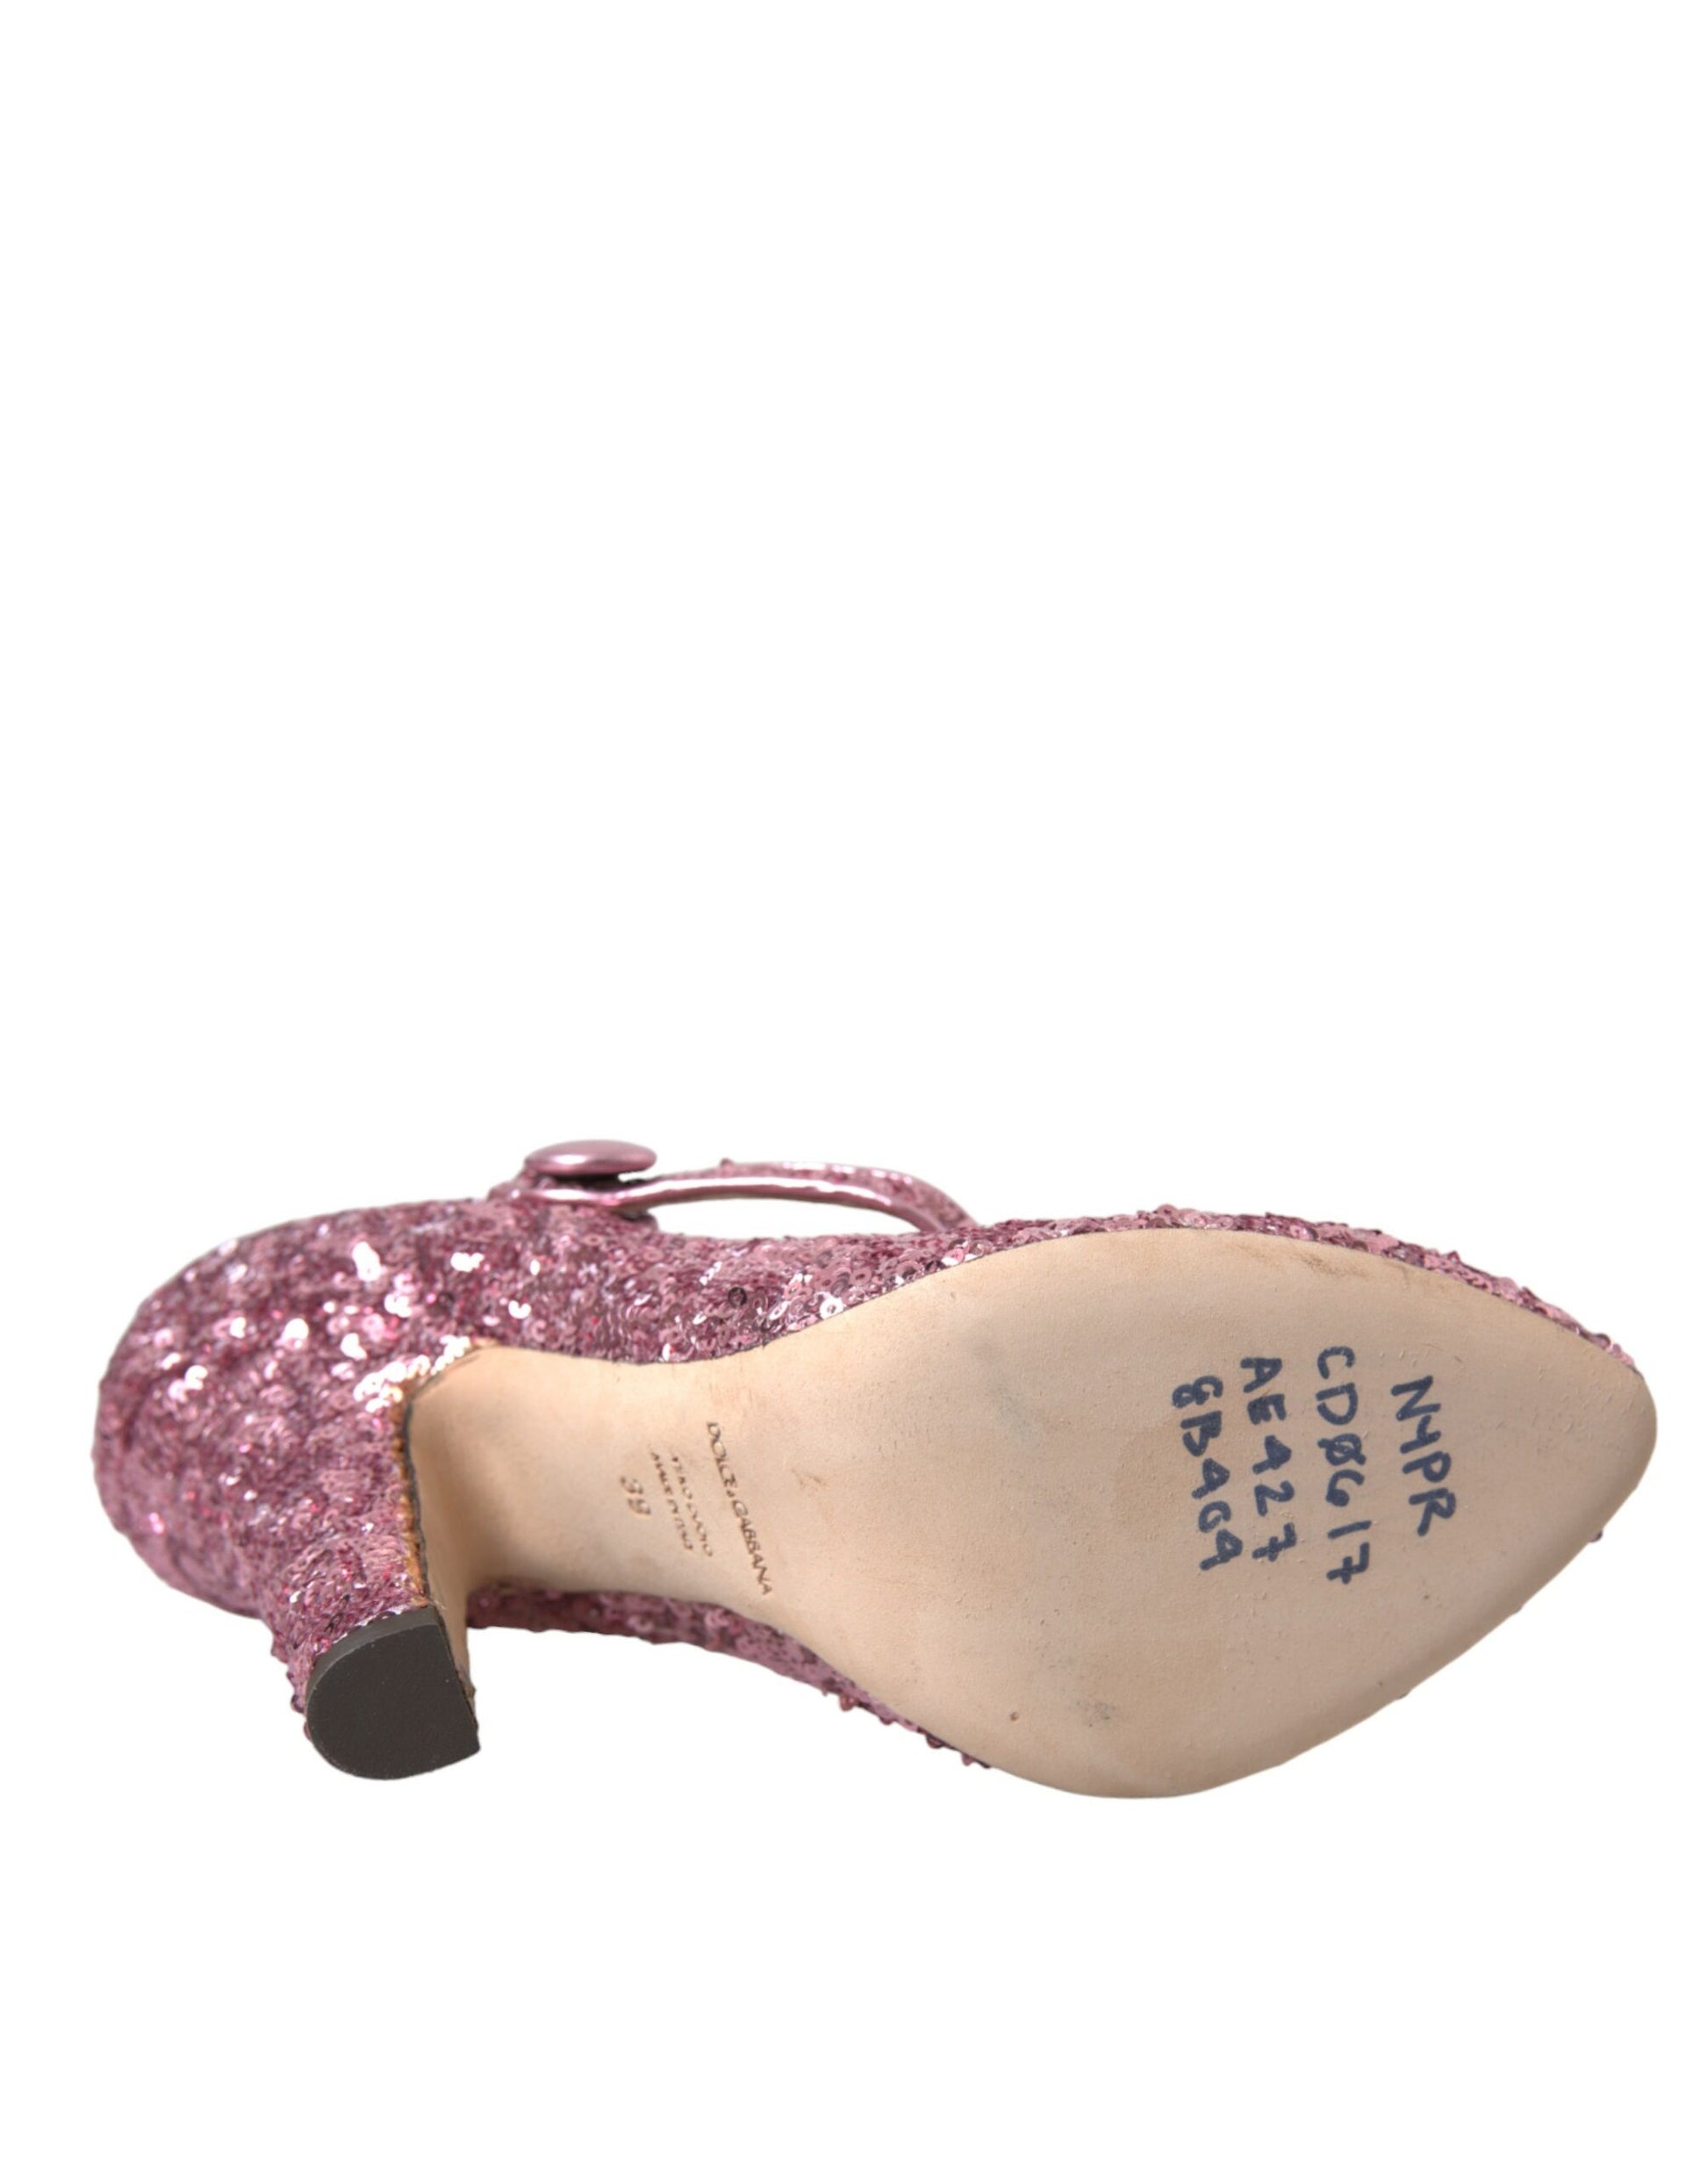 Pink Sequin Mary Jane Pumps High Heels Shoes